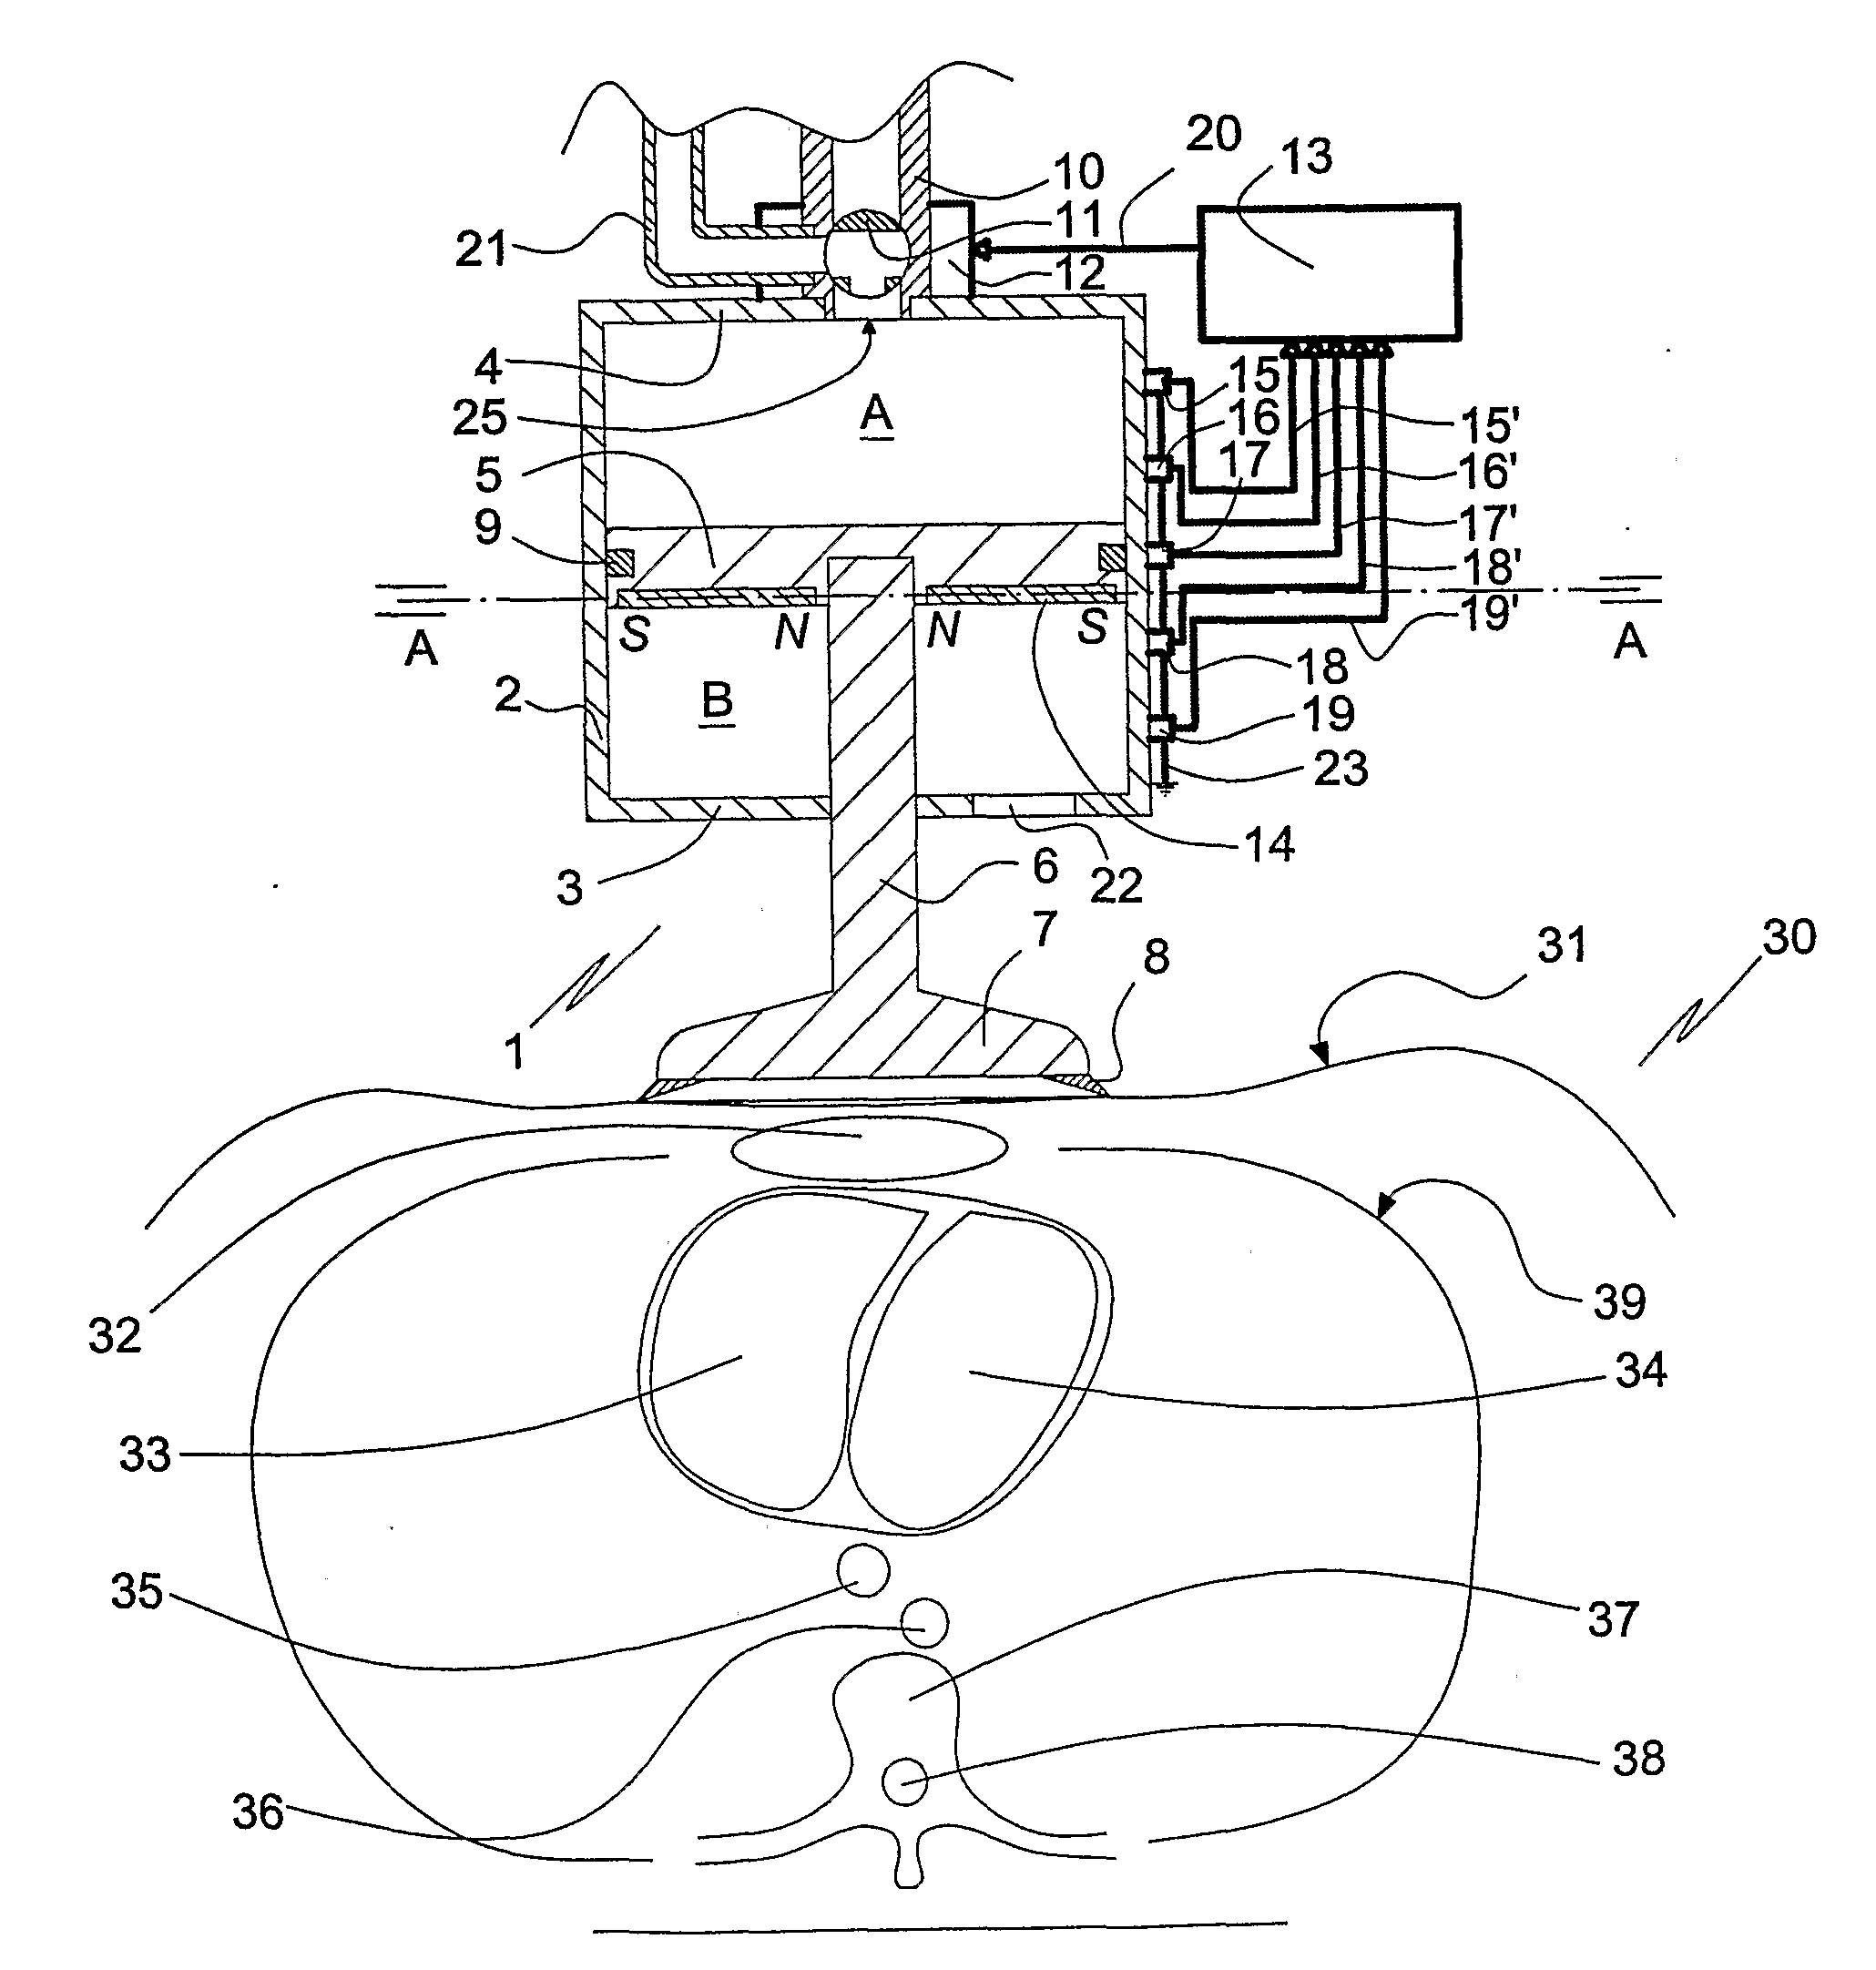 Driving control of a reciprocating cpr apparatus